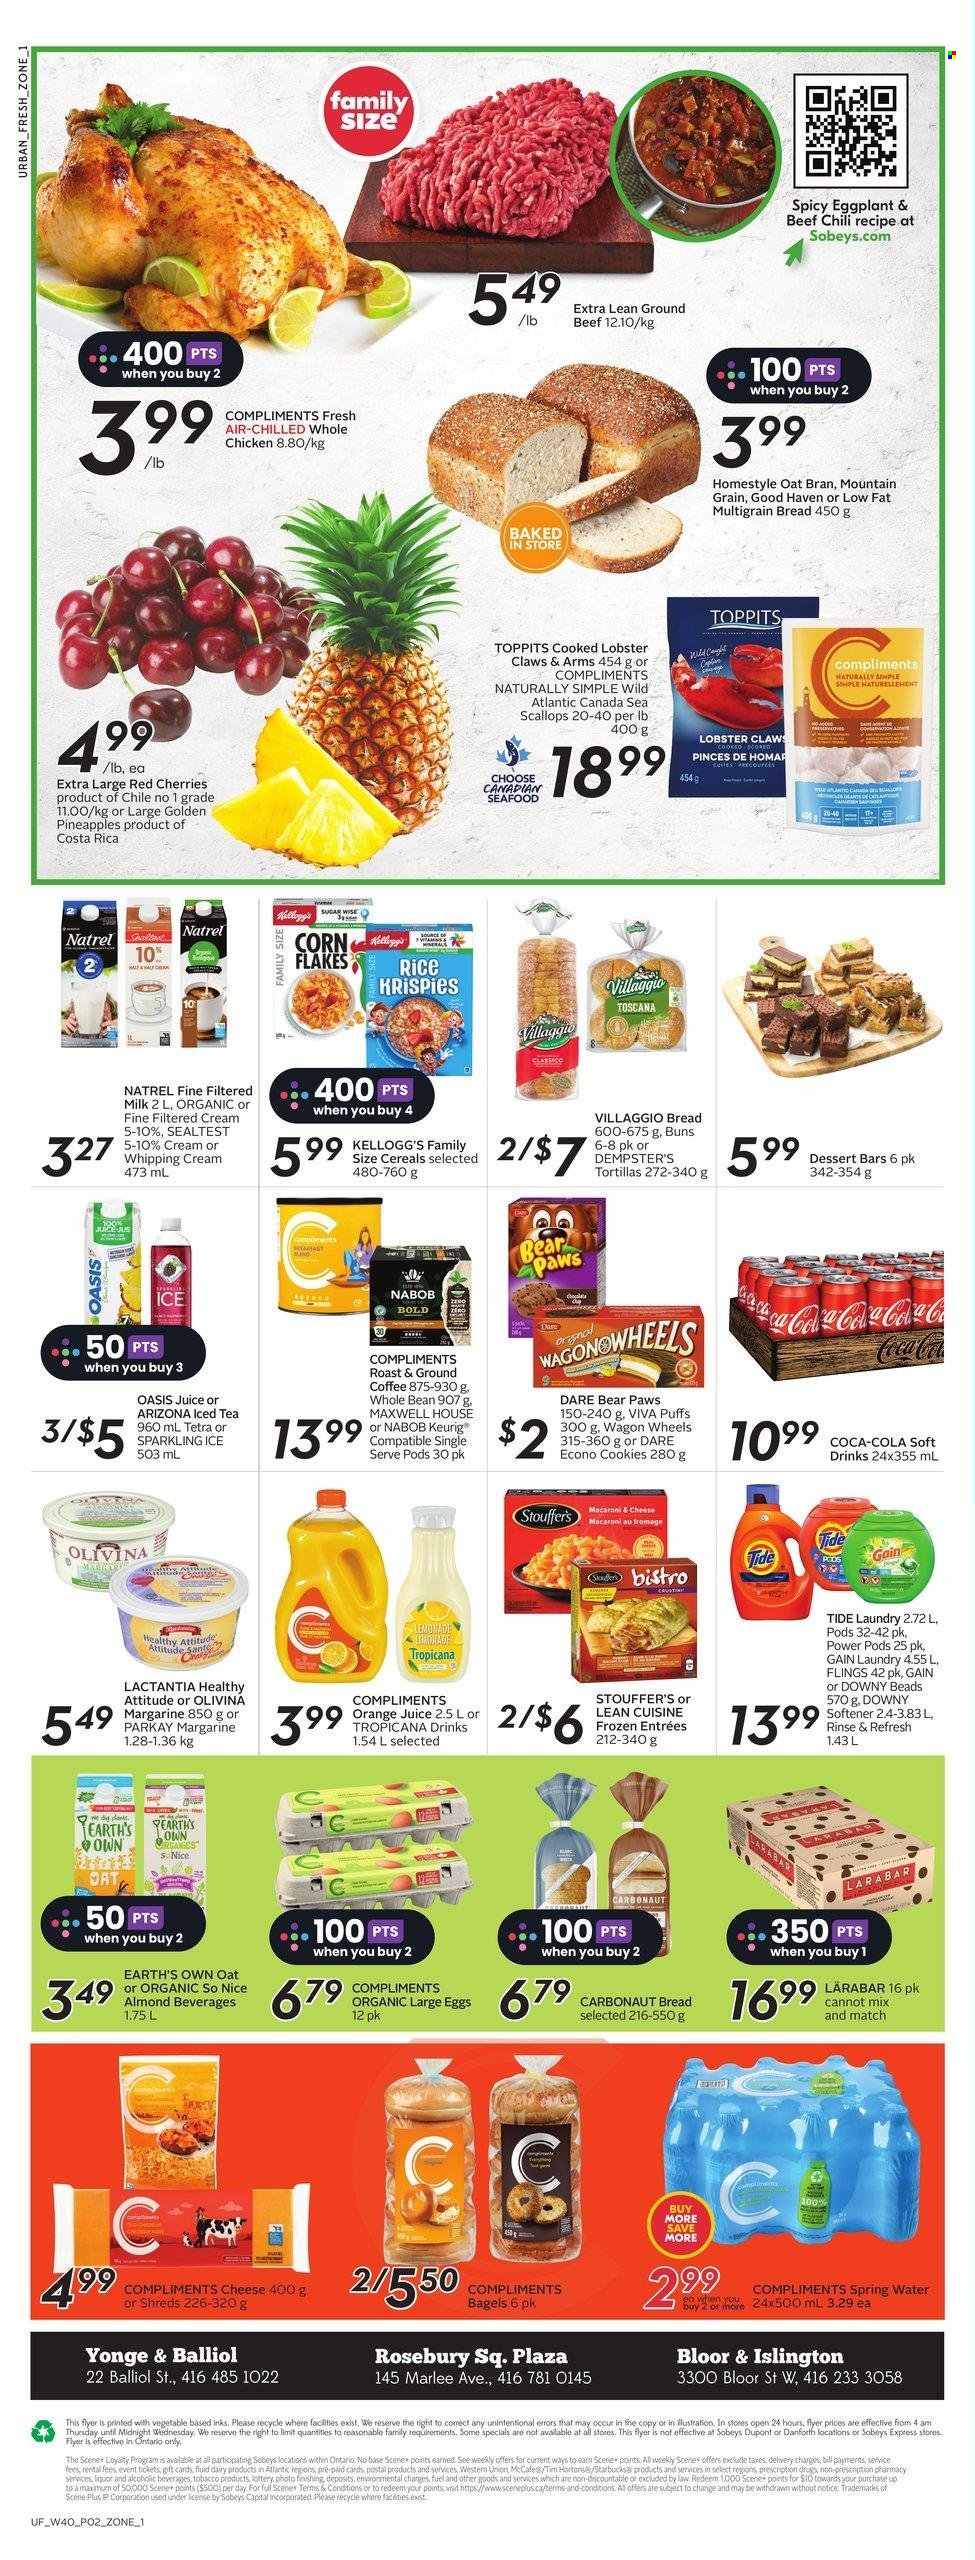 thumbnail - Sobeys Urban Fresh Flyer - February 02, 2023 - February 08, 2023 - Sales products - bagels, bread, multigrain bread, tortillas, buns, puffs, eggplant, pineapple, cherries, lobster, scallops, seafood, Lean Cuisine, cheese, milk, large eggs, margarine, whipping cream, Stouffer's, cookies, Kellogg's, sugar, corn flakes, Rice Krispies, Classico, Coca-Cola, lemonade, orange juice, juice, ice tea, soft drink, AriZona, spring water, Maxwell House, coffee, ground coffee, Starbucks, McCafe, Keurig, So Nice, whole chicken, chicken, beef meat, ground beef, Gain, Tide, fabric softener, Downy Laundry, Paws. Page 2.